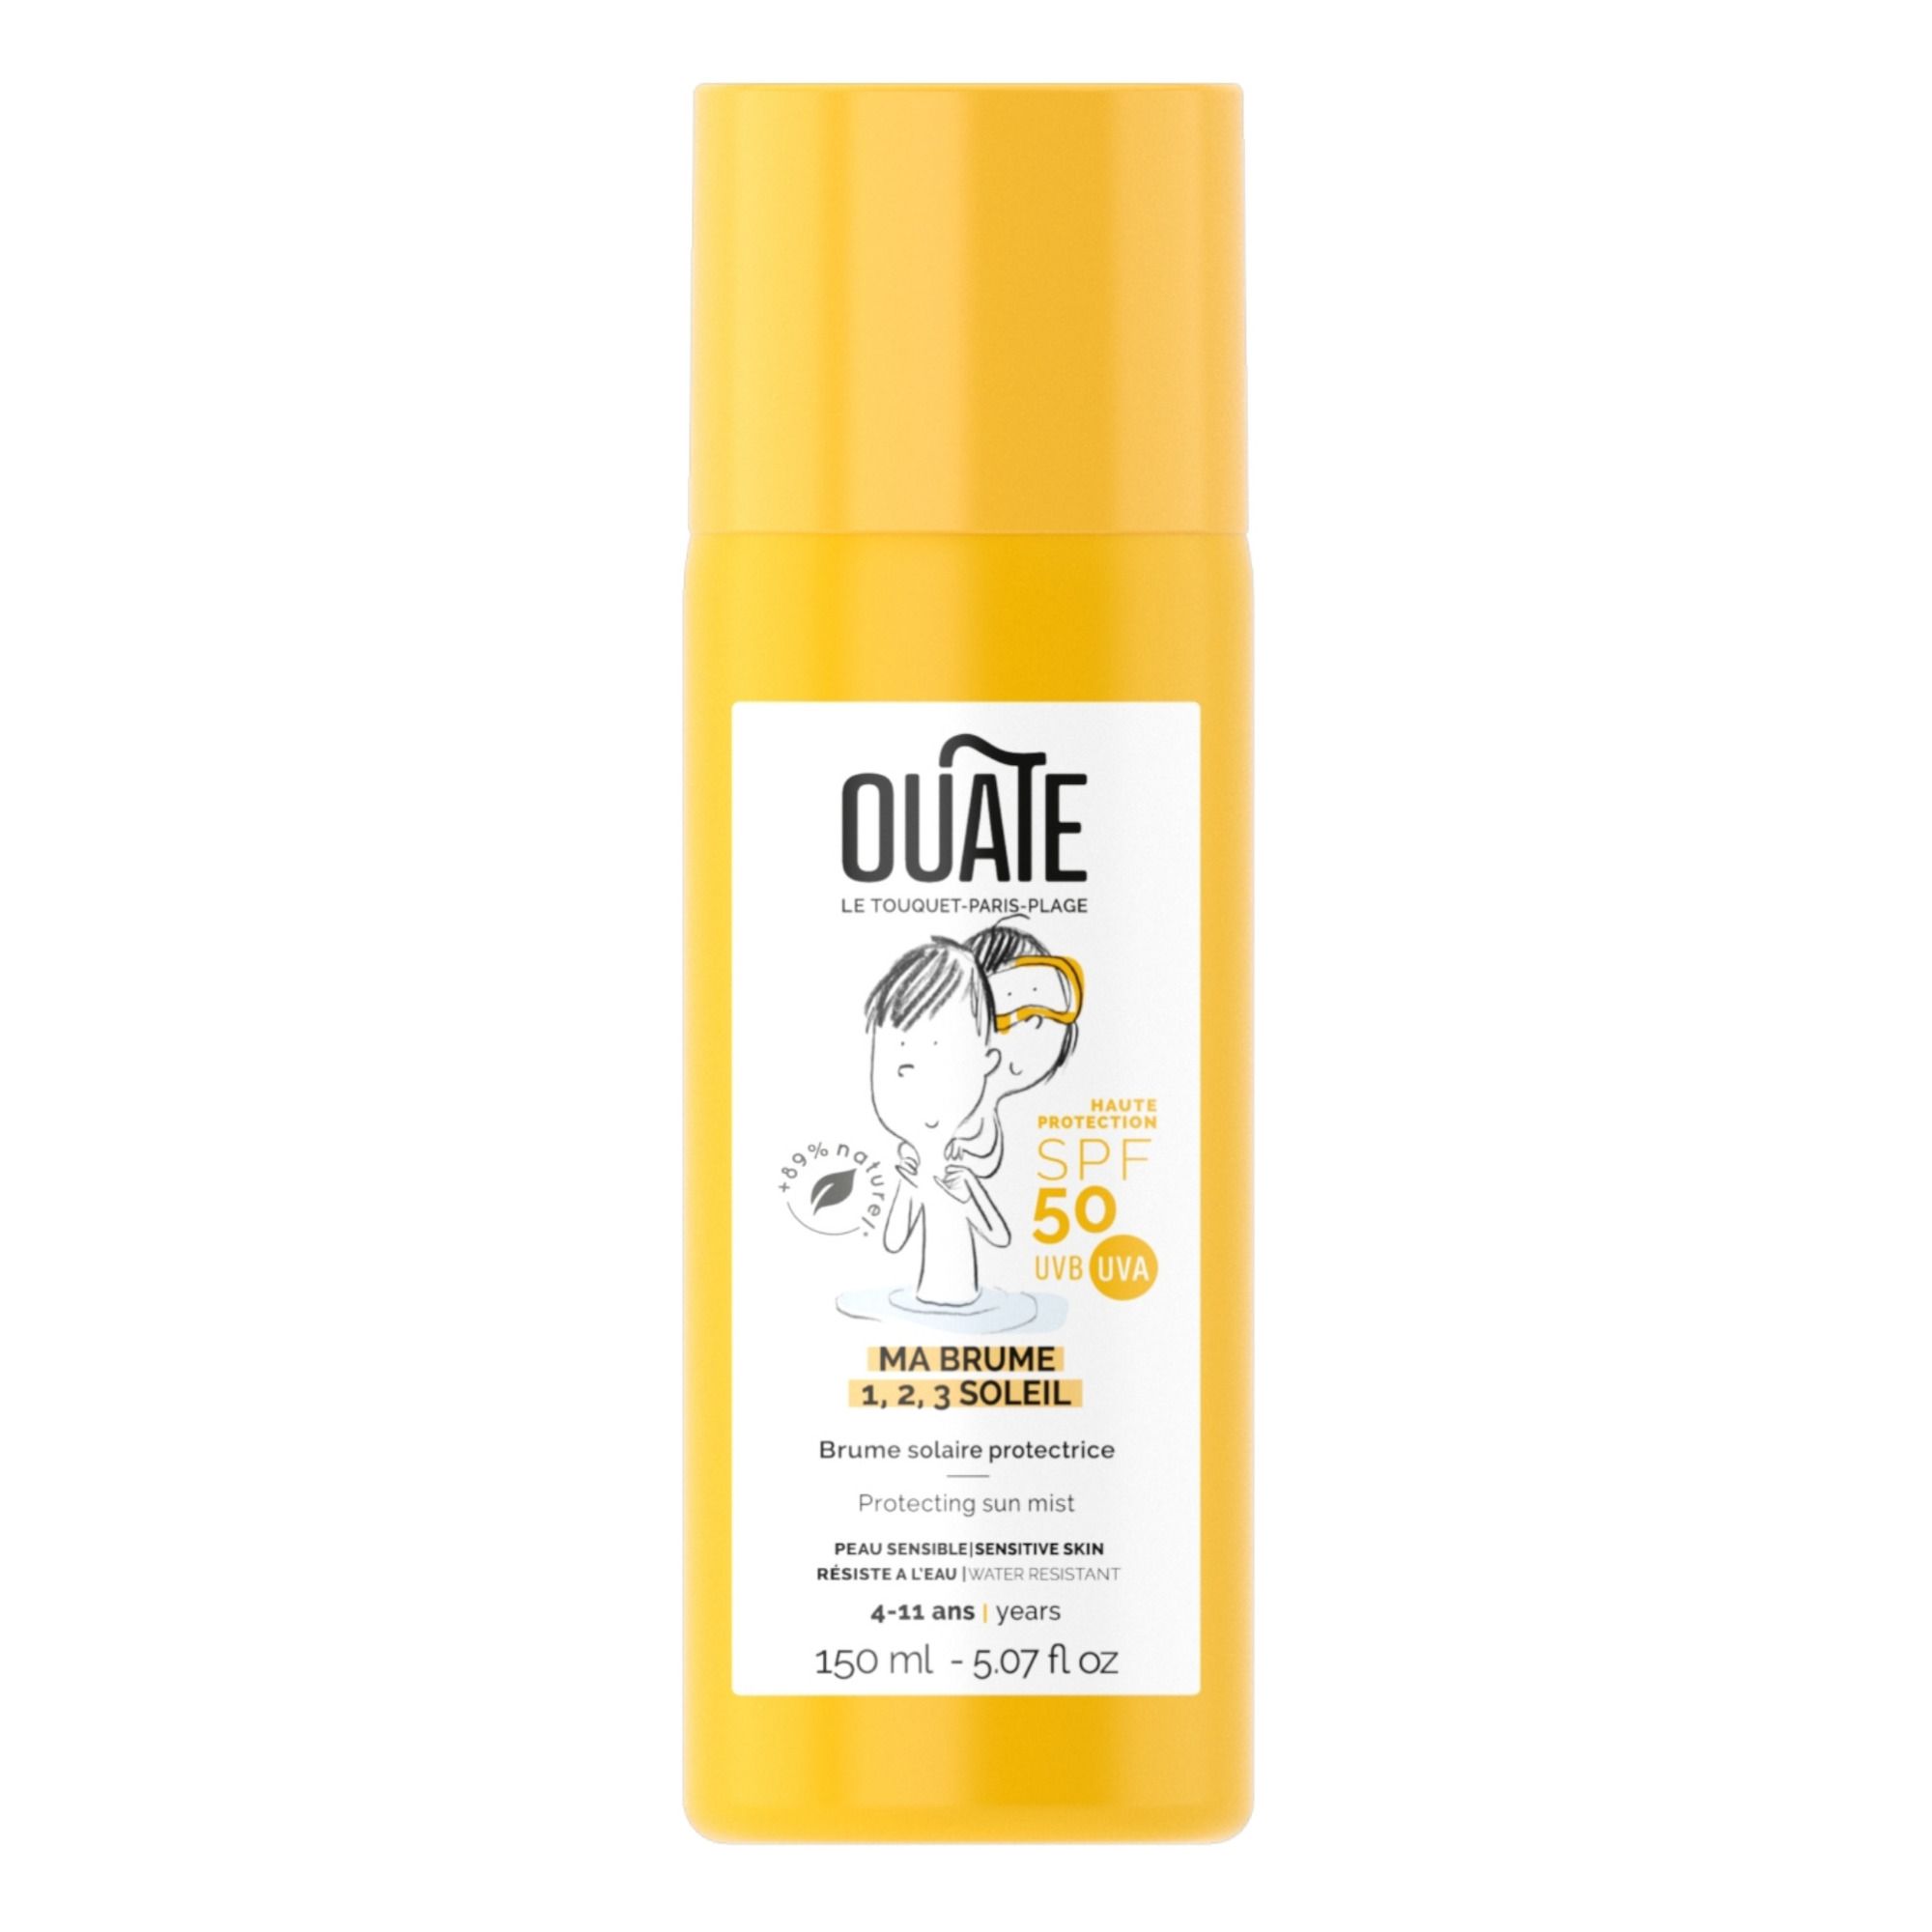 Ouate - Brume protectrice solaire visage et corps SPF 50 - 150 ml - Blanc